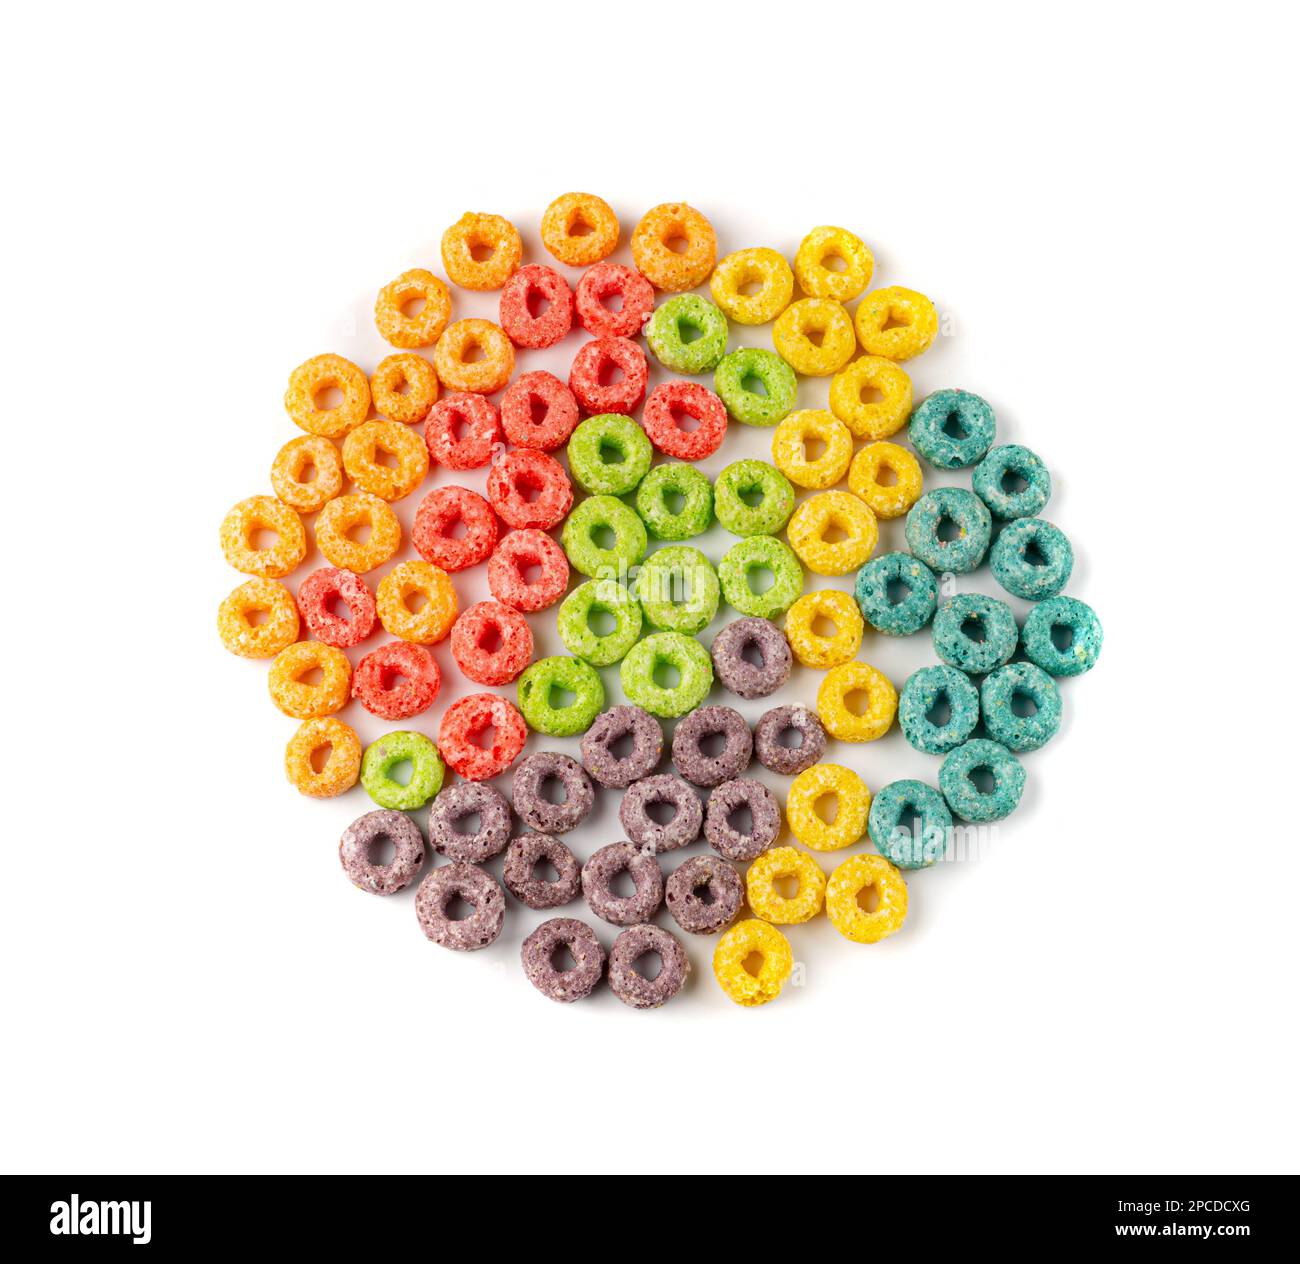 Colorful Breakfast Rings Pile Isolated. Fruit Loops, Fruity Cereal Rings, Colorful Corn Cereals on White Background Stock Photo